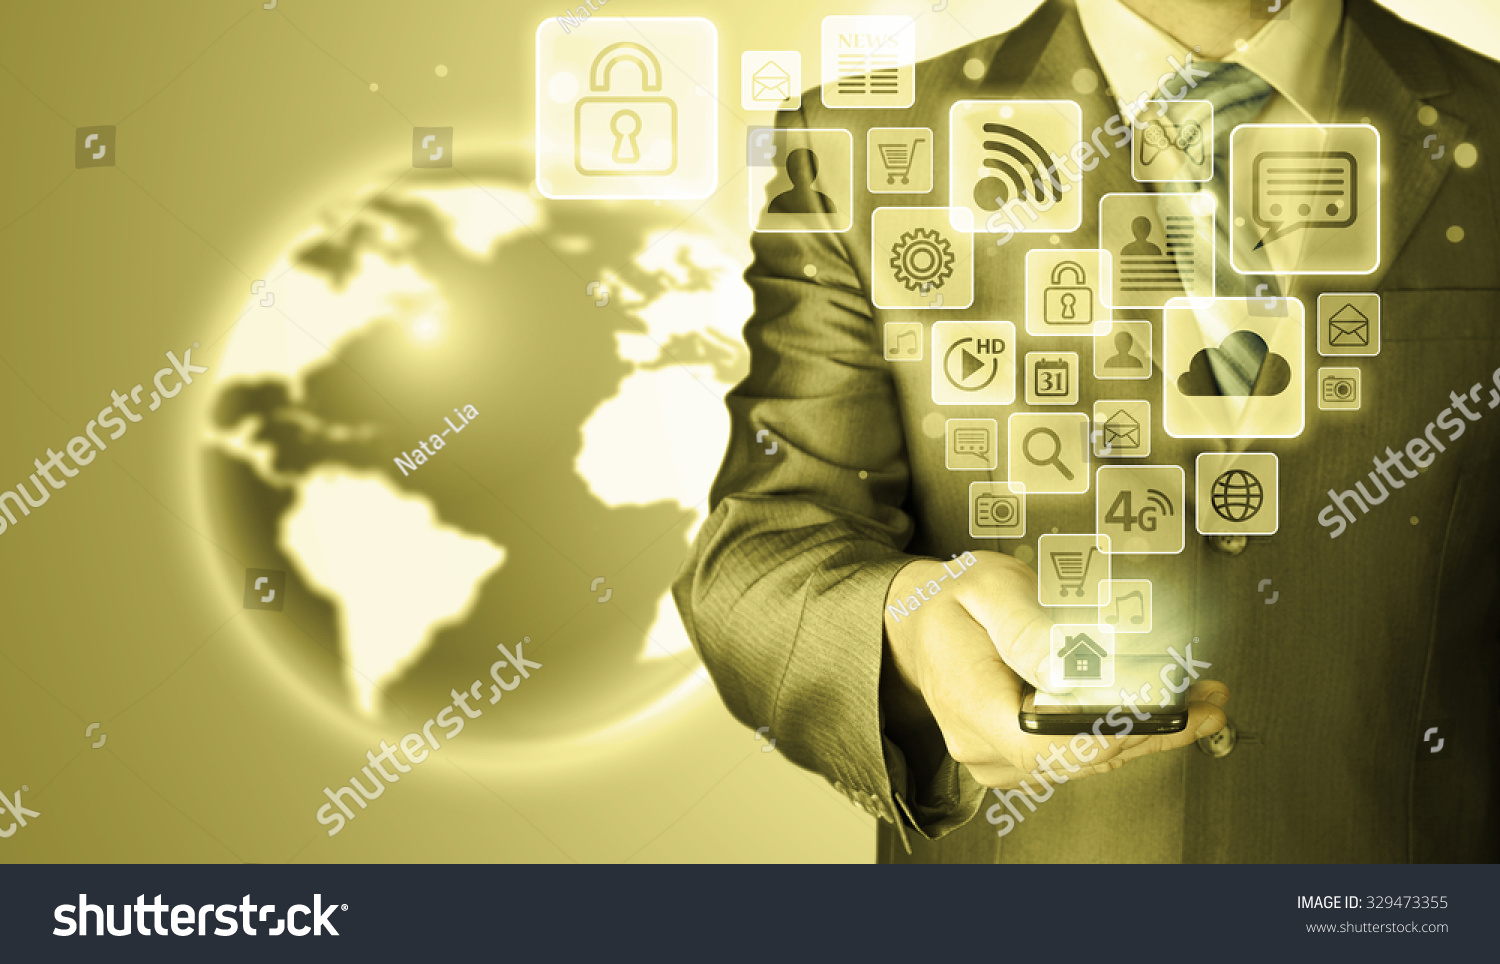 Business man using smart phone with social media icon set #329473355